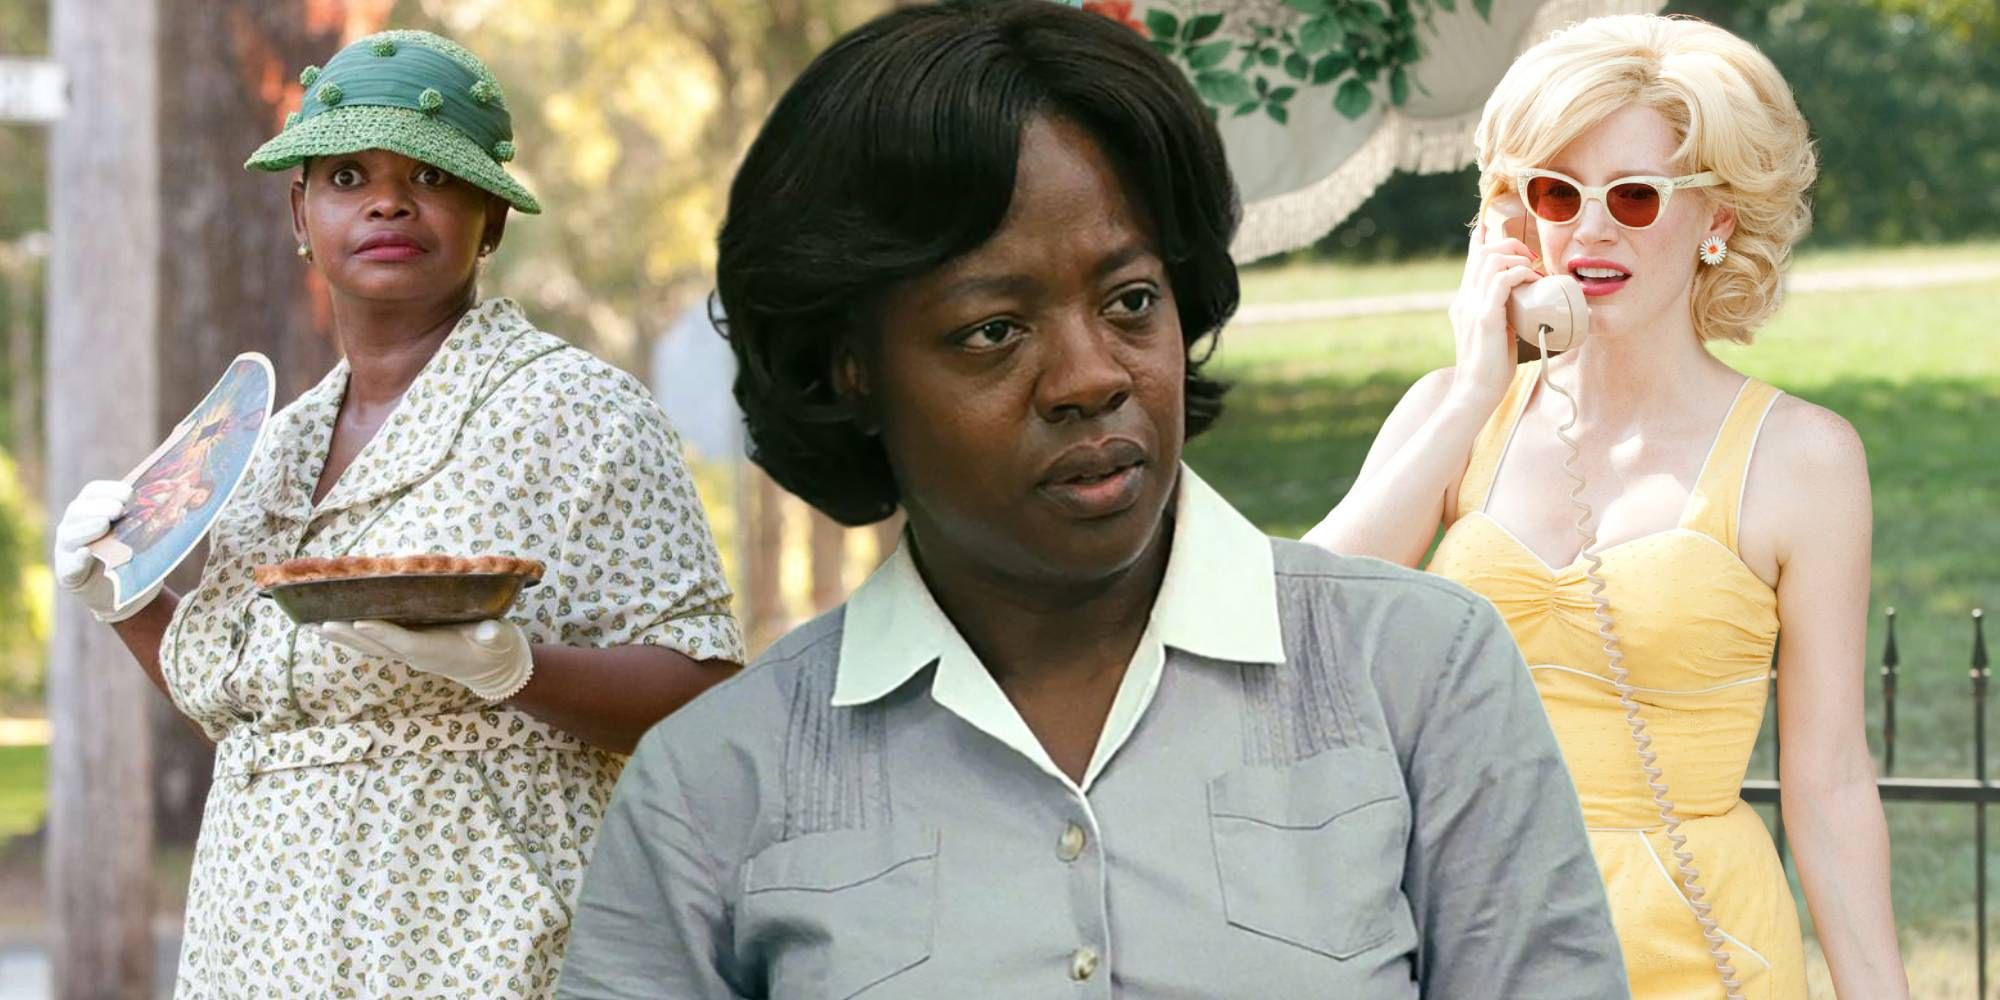 Octavia Spencer, Viola Davis and Jessica Chastain in The Help